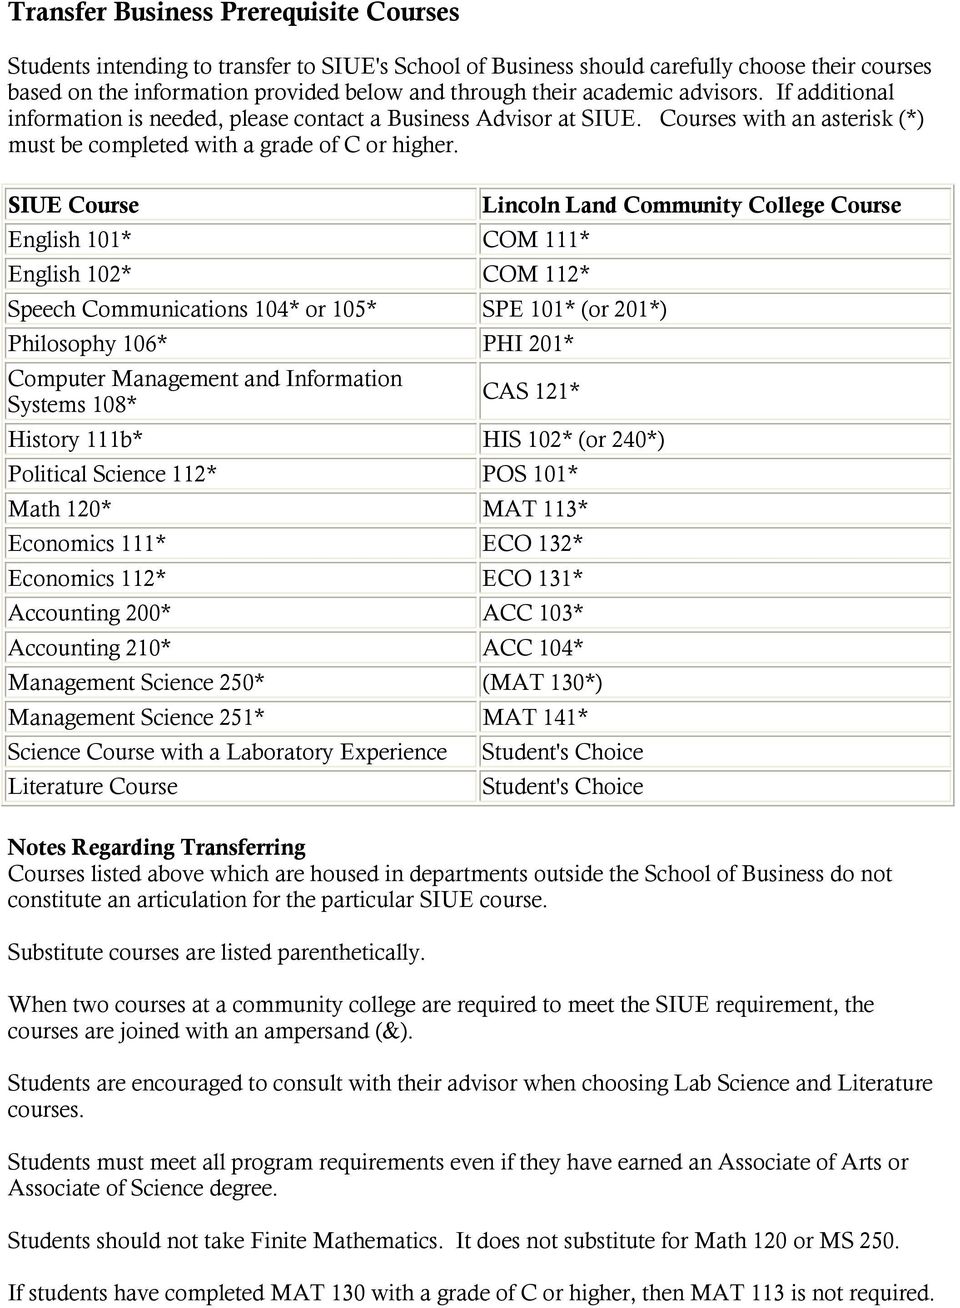 SIUE Course Lincoln Land Community College Course English 101* COM 111* English 102* COM 112* Speech Communications 104* or 105* SPE 101* (or 201*) Philosophy 106* PHI 201* Computer Management and